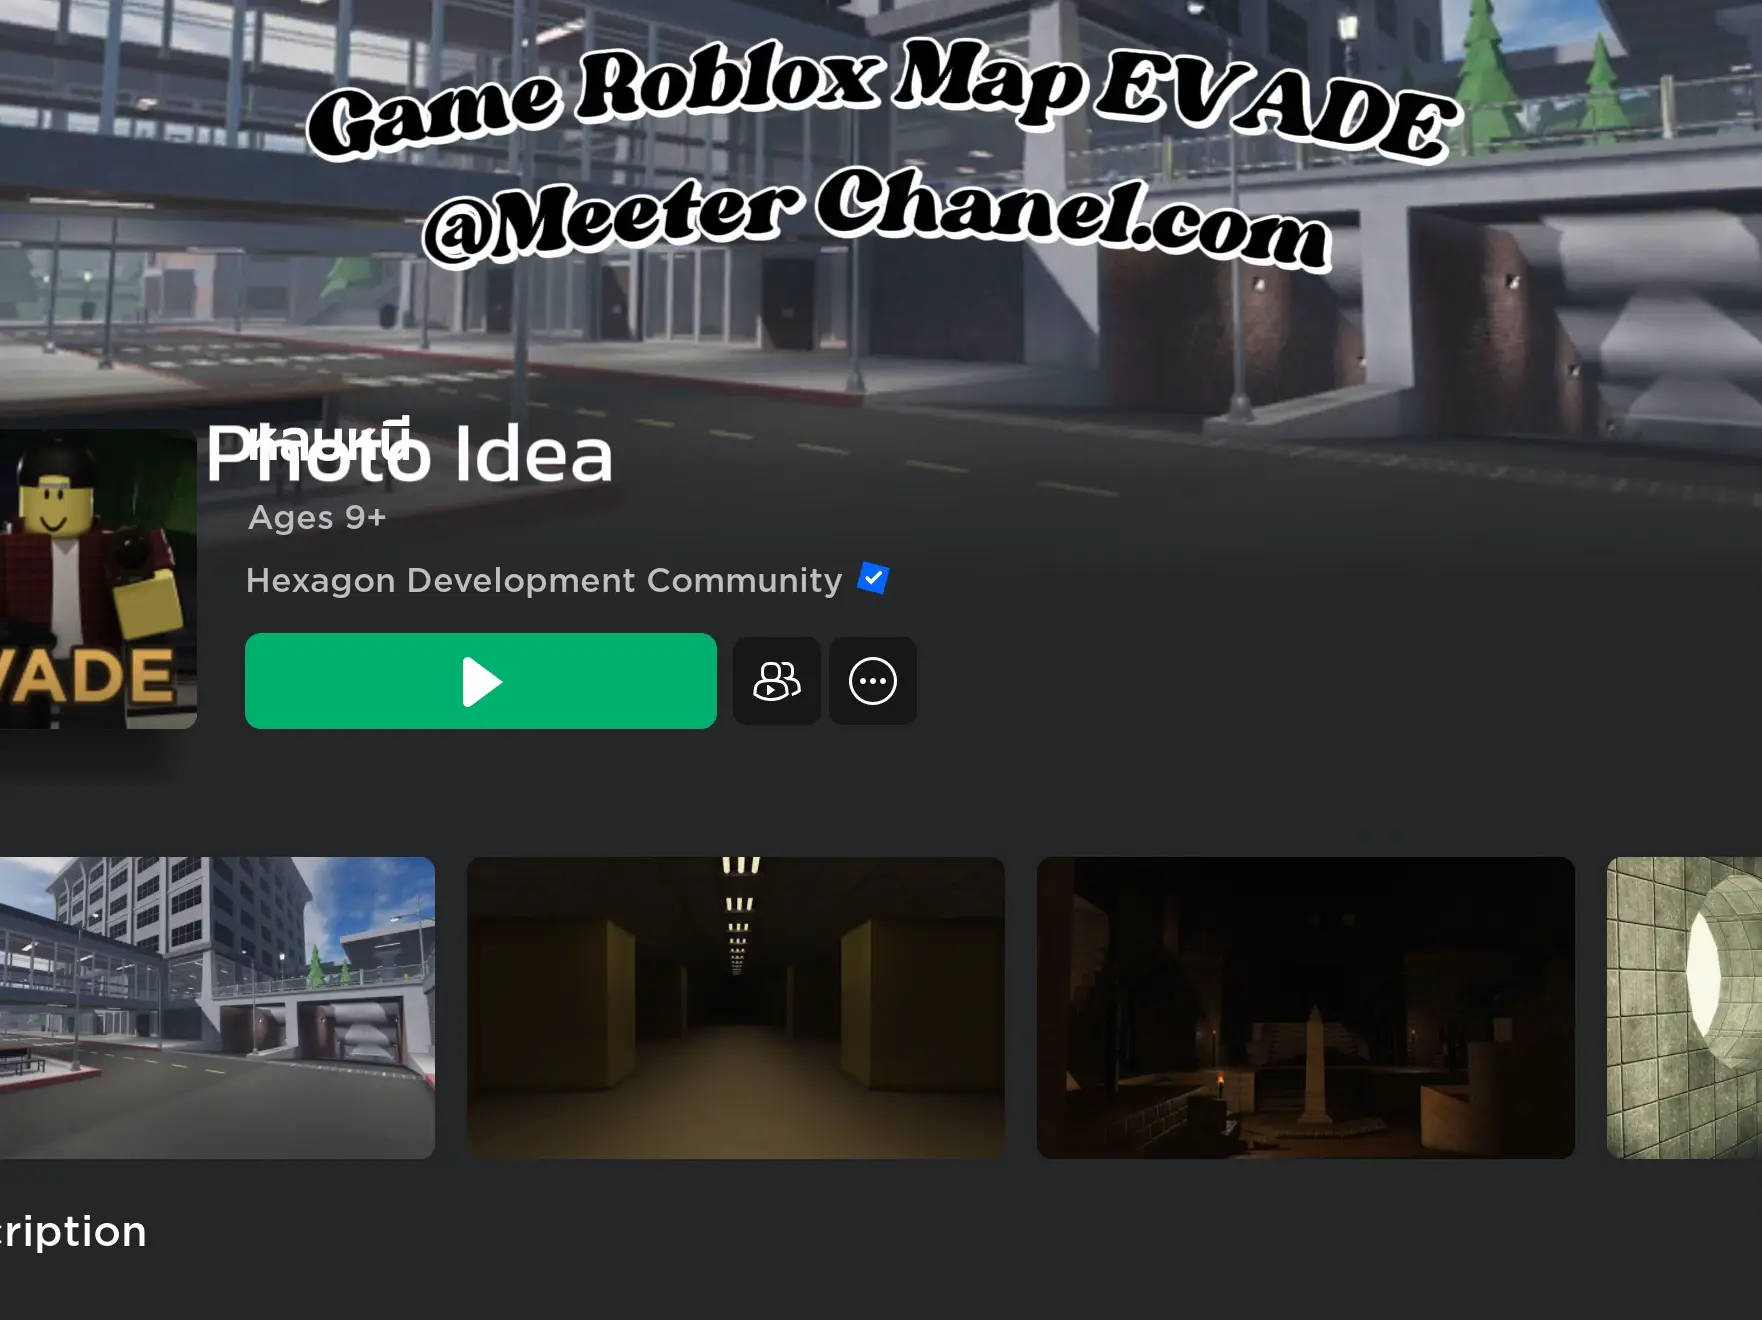 Game Roblox Map EVADE@Meeter Chanel.com